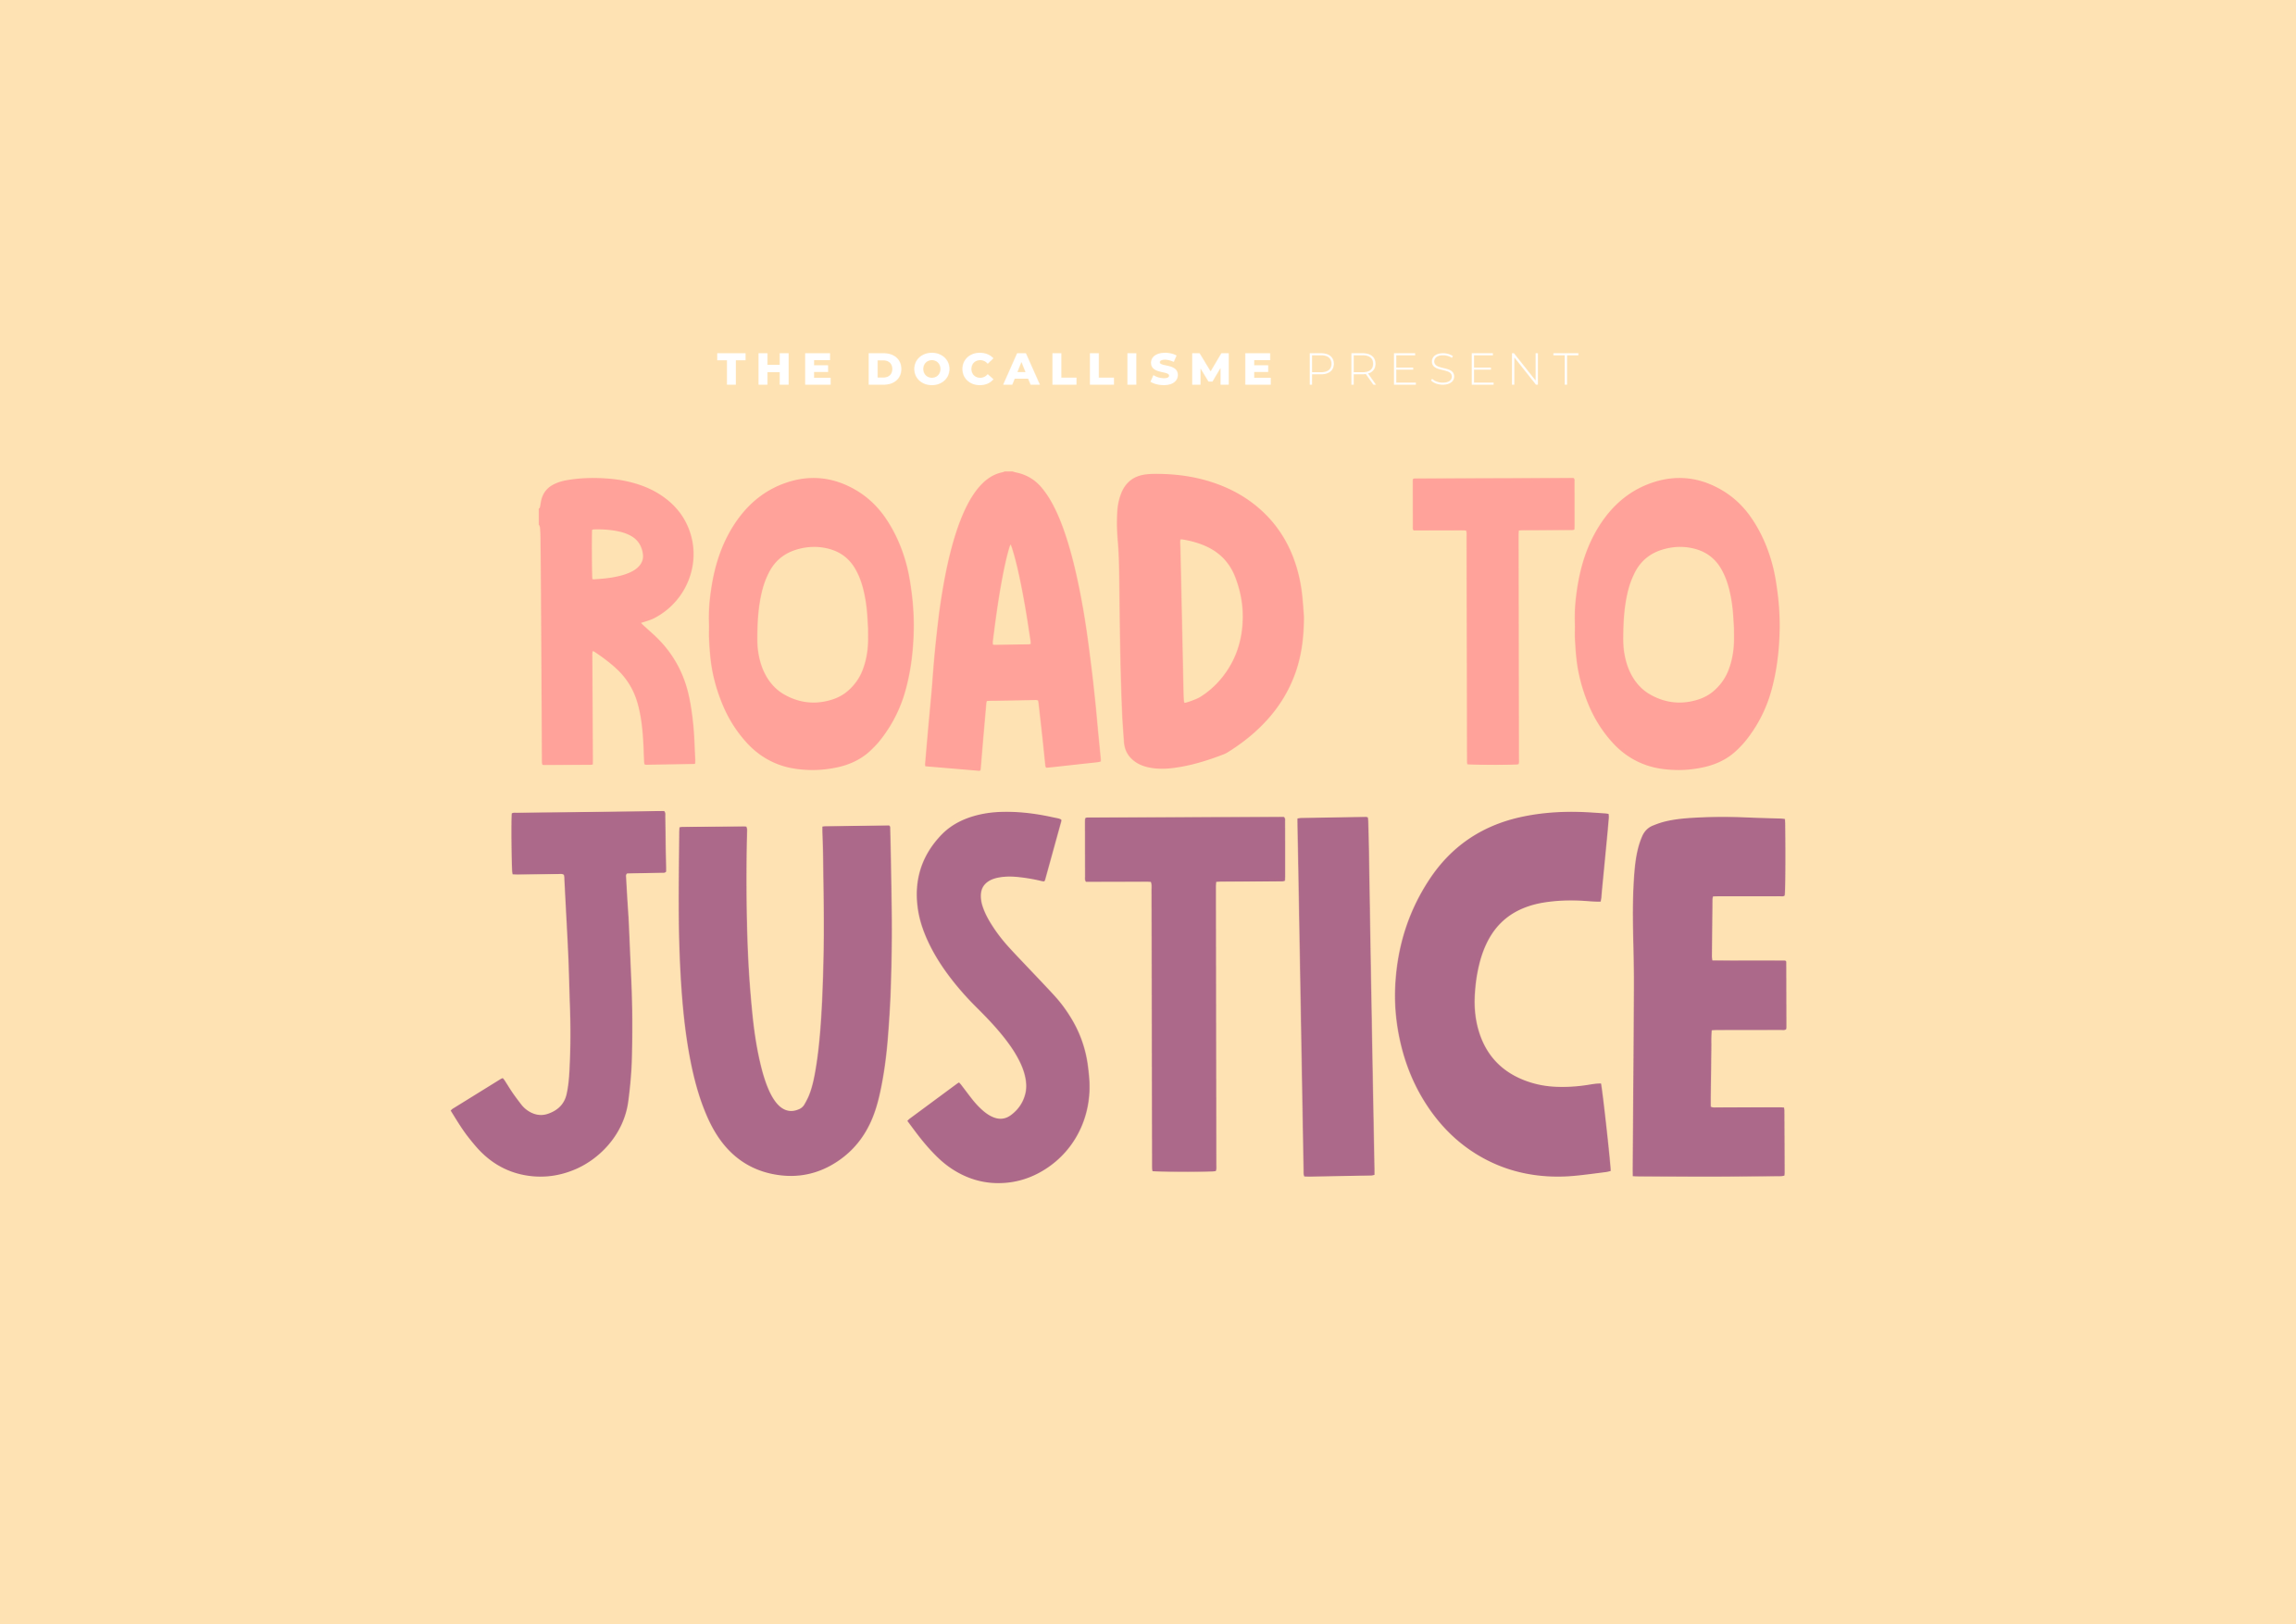 ROAD TO JUSTICE